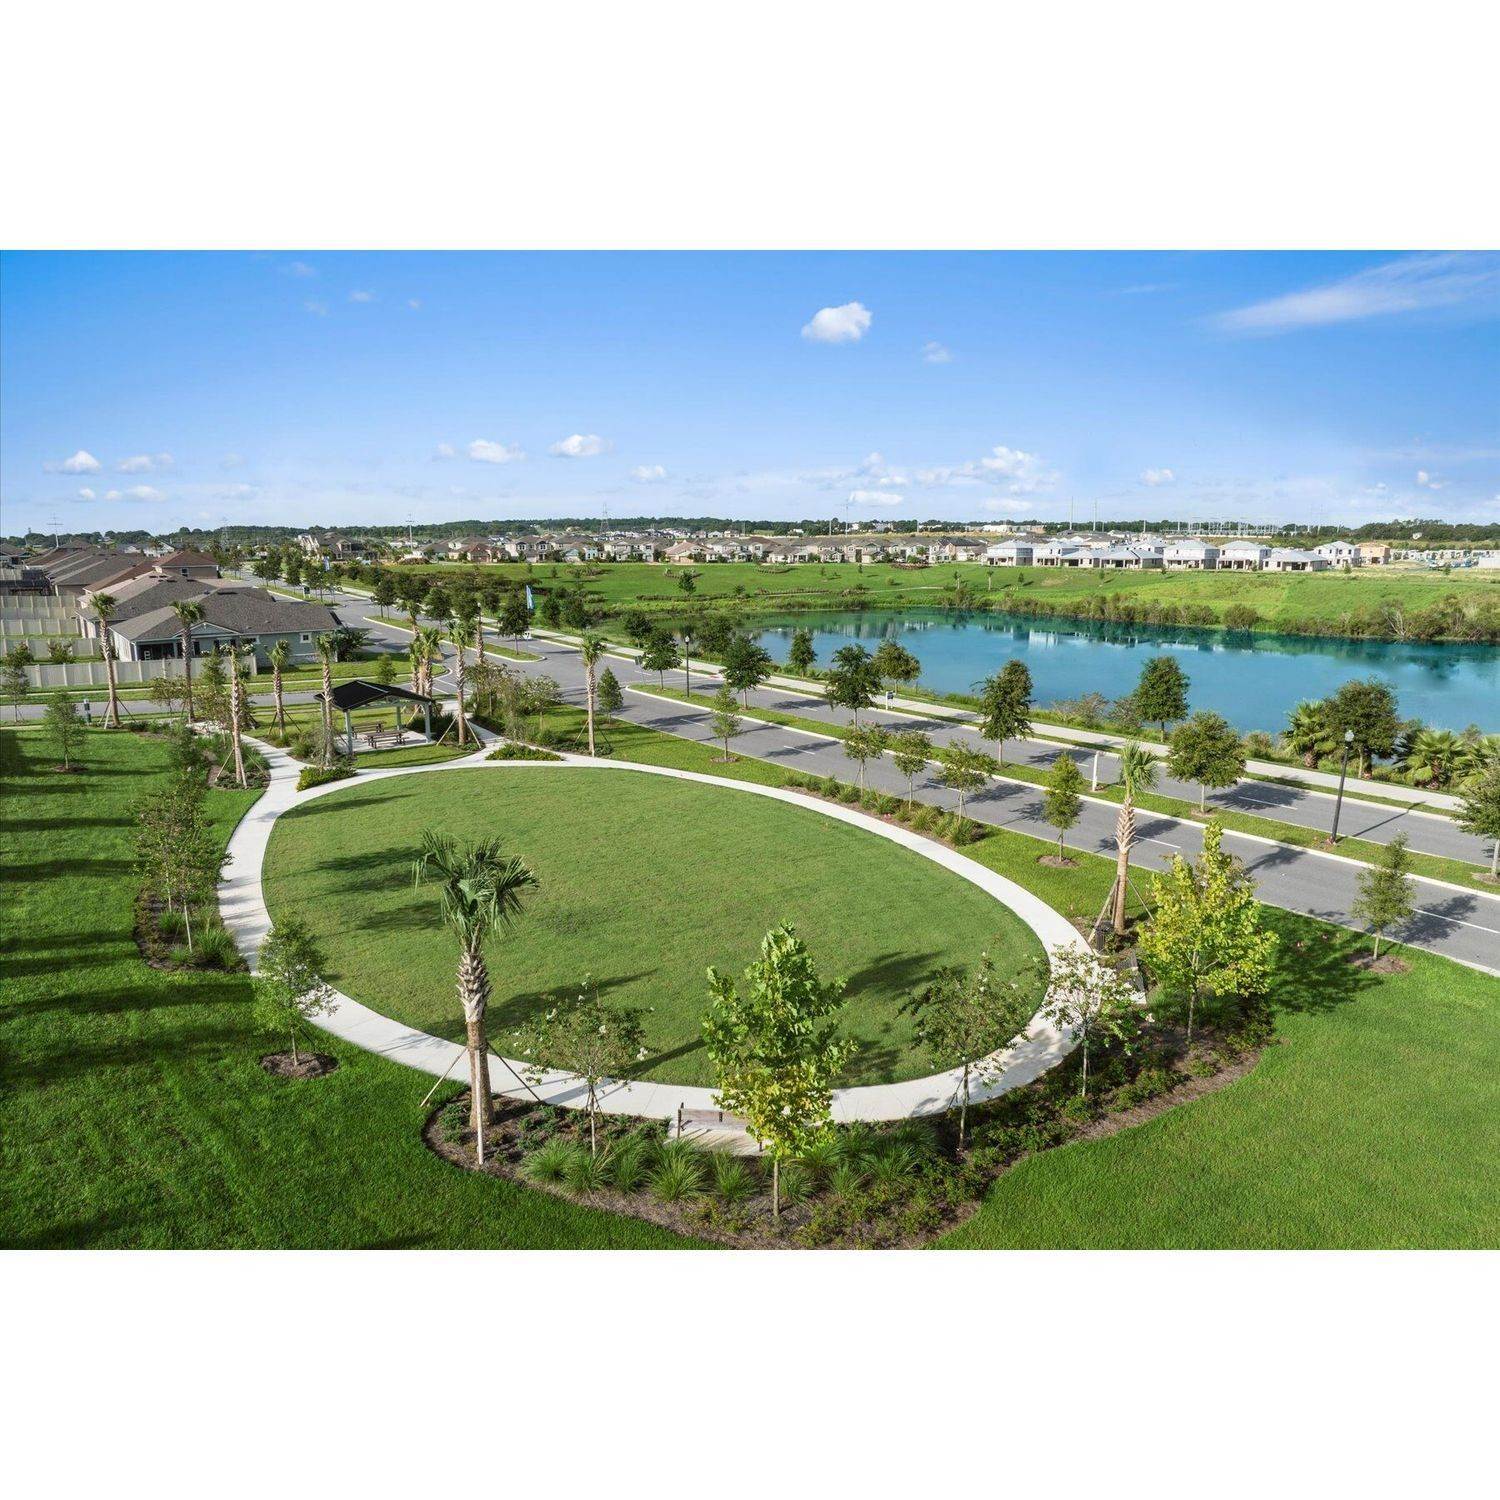 16. Waterbrooke bâtiment à 3029 Ambersweet Place, Clermont, FL 34711